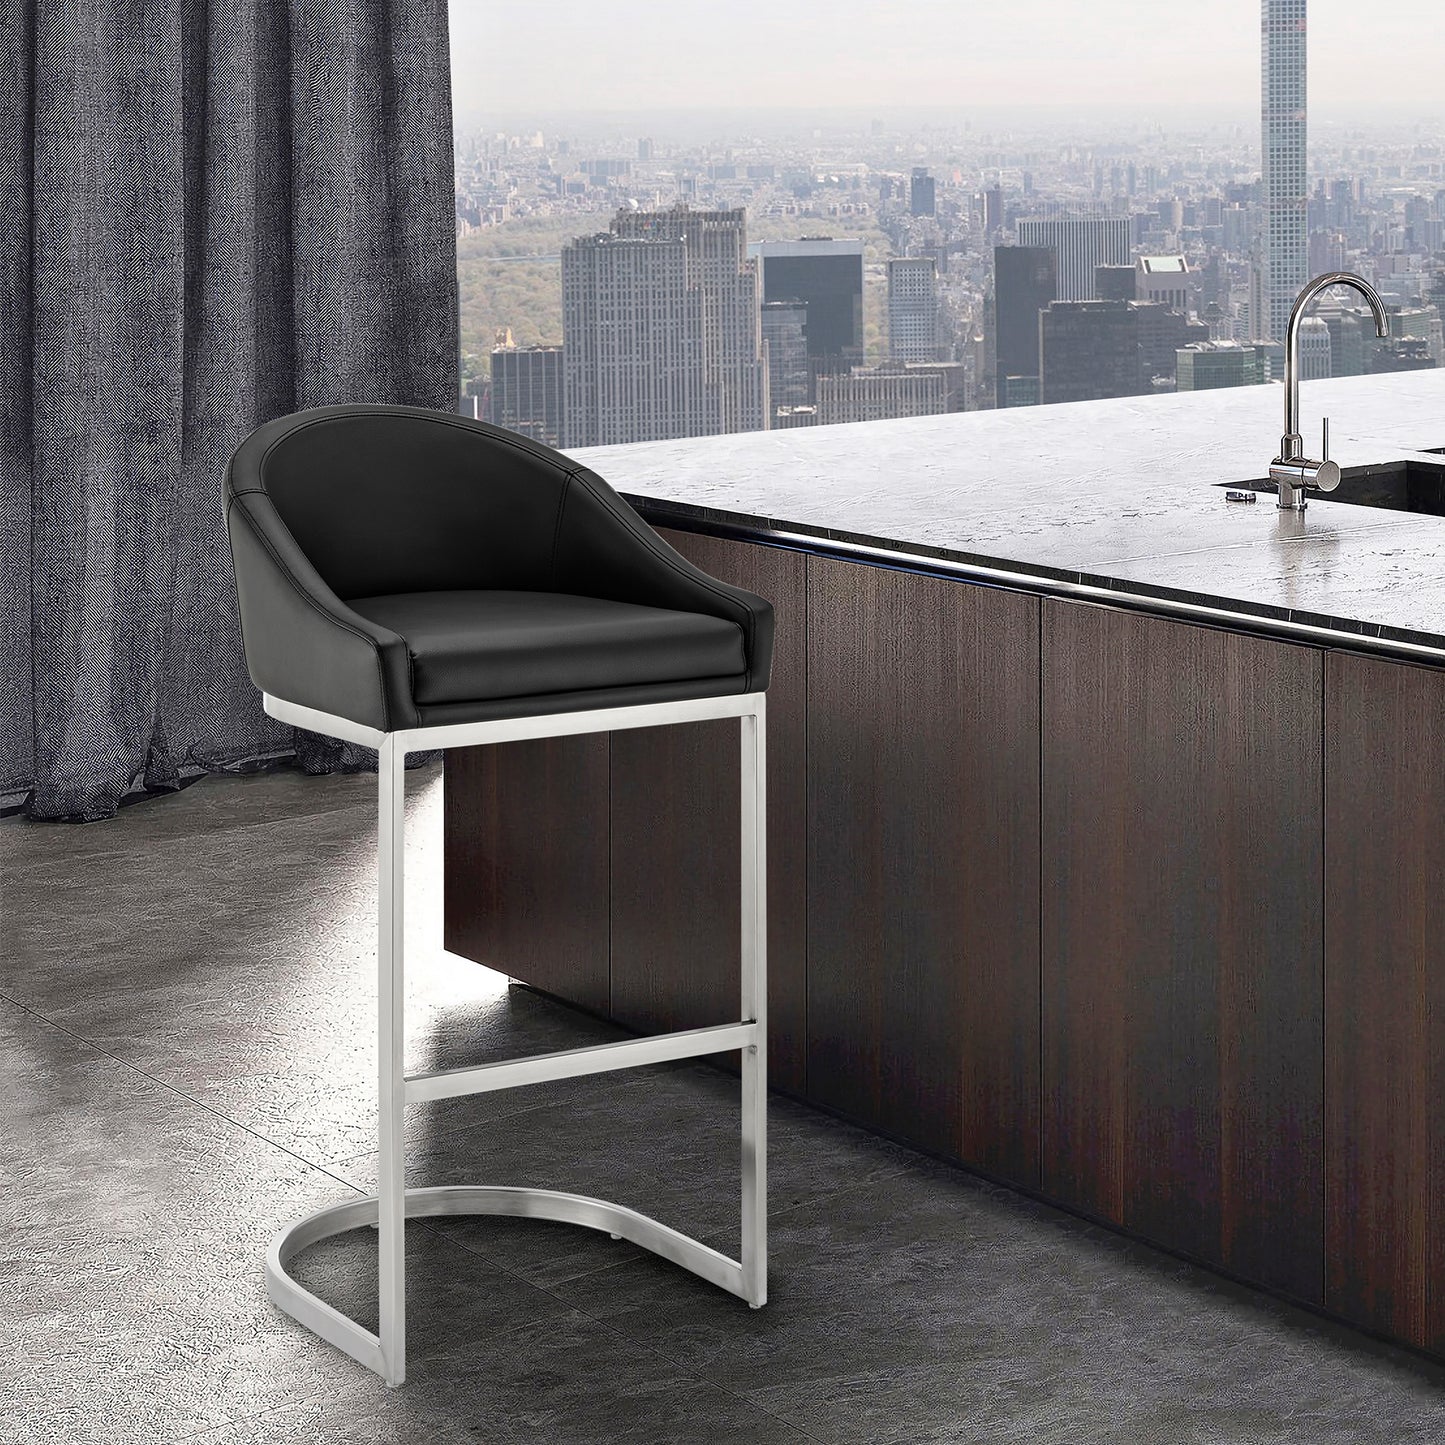 Katherine 30" Bar Stool in Brushed Stainless Steel with Black Faux Leather